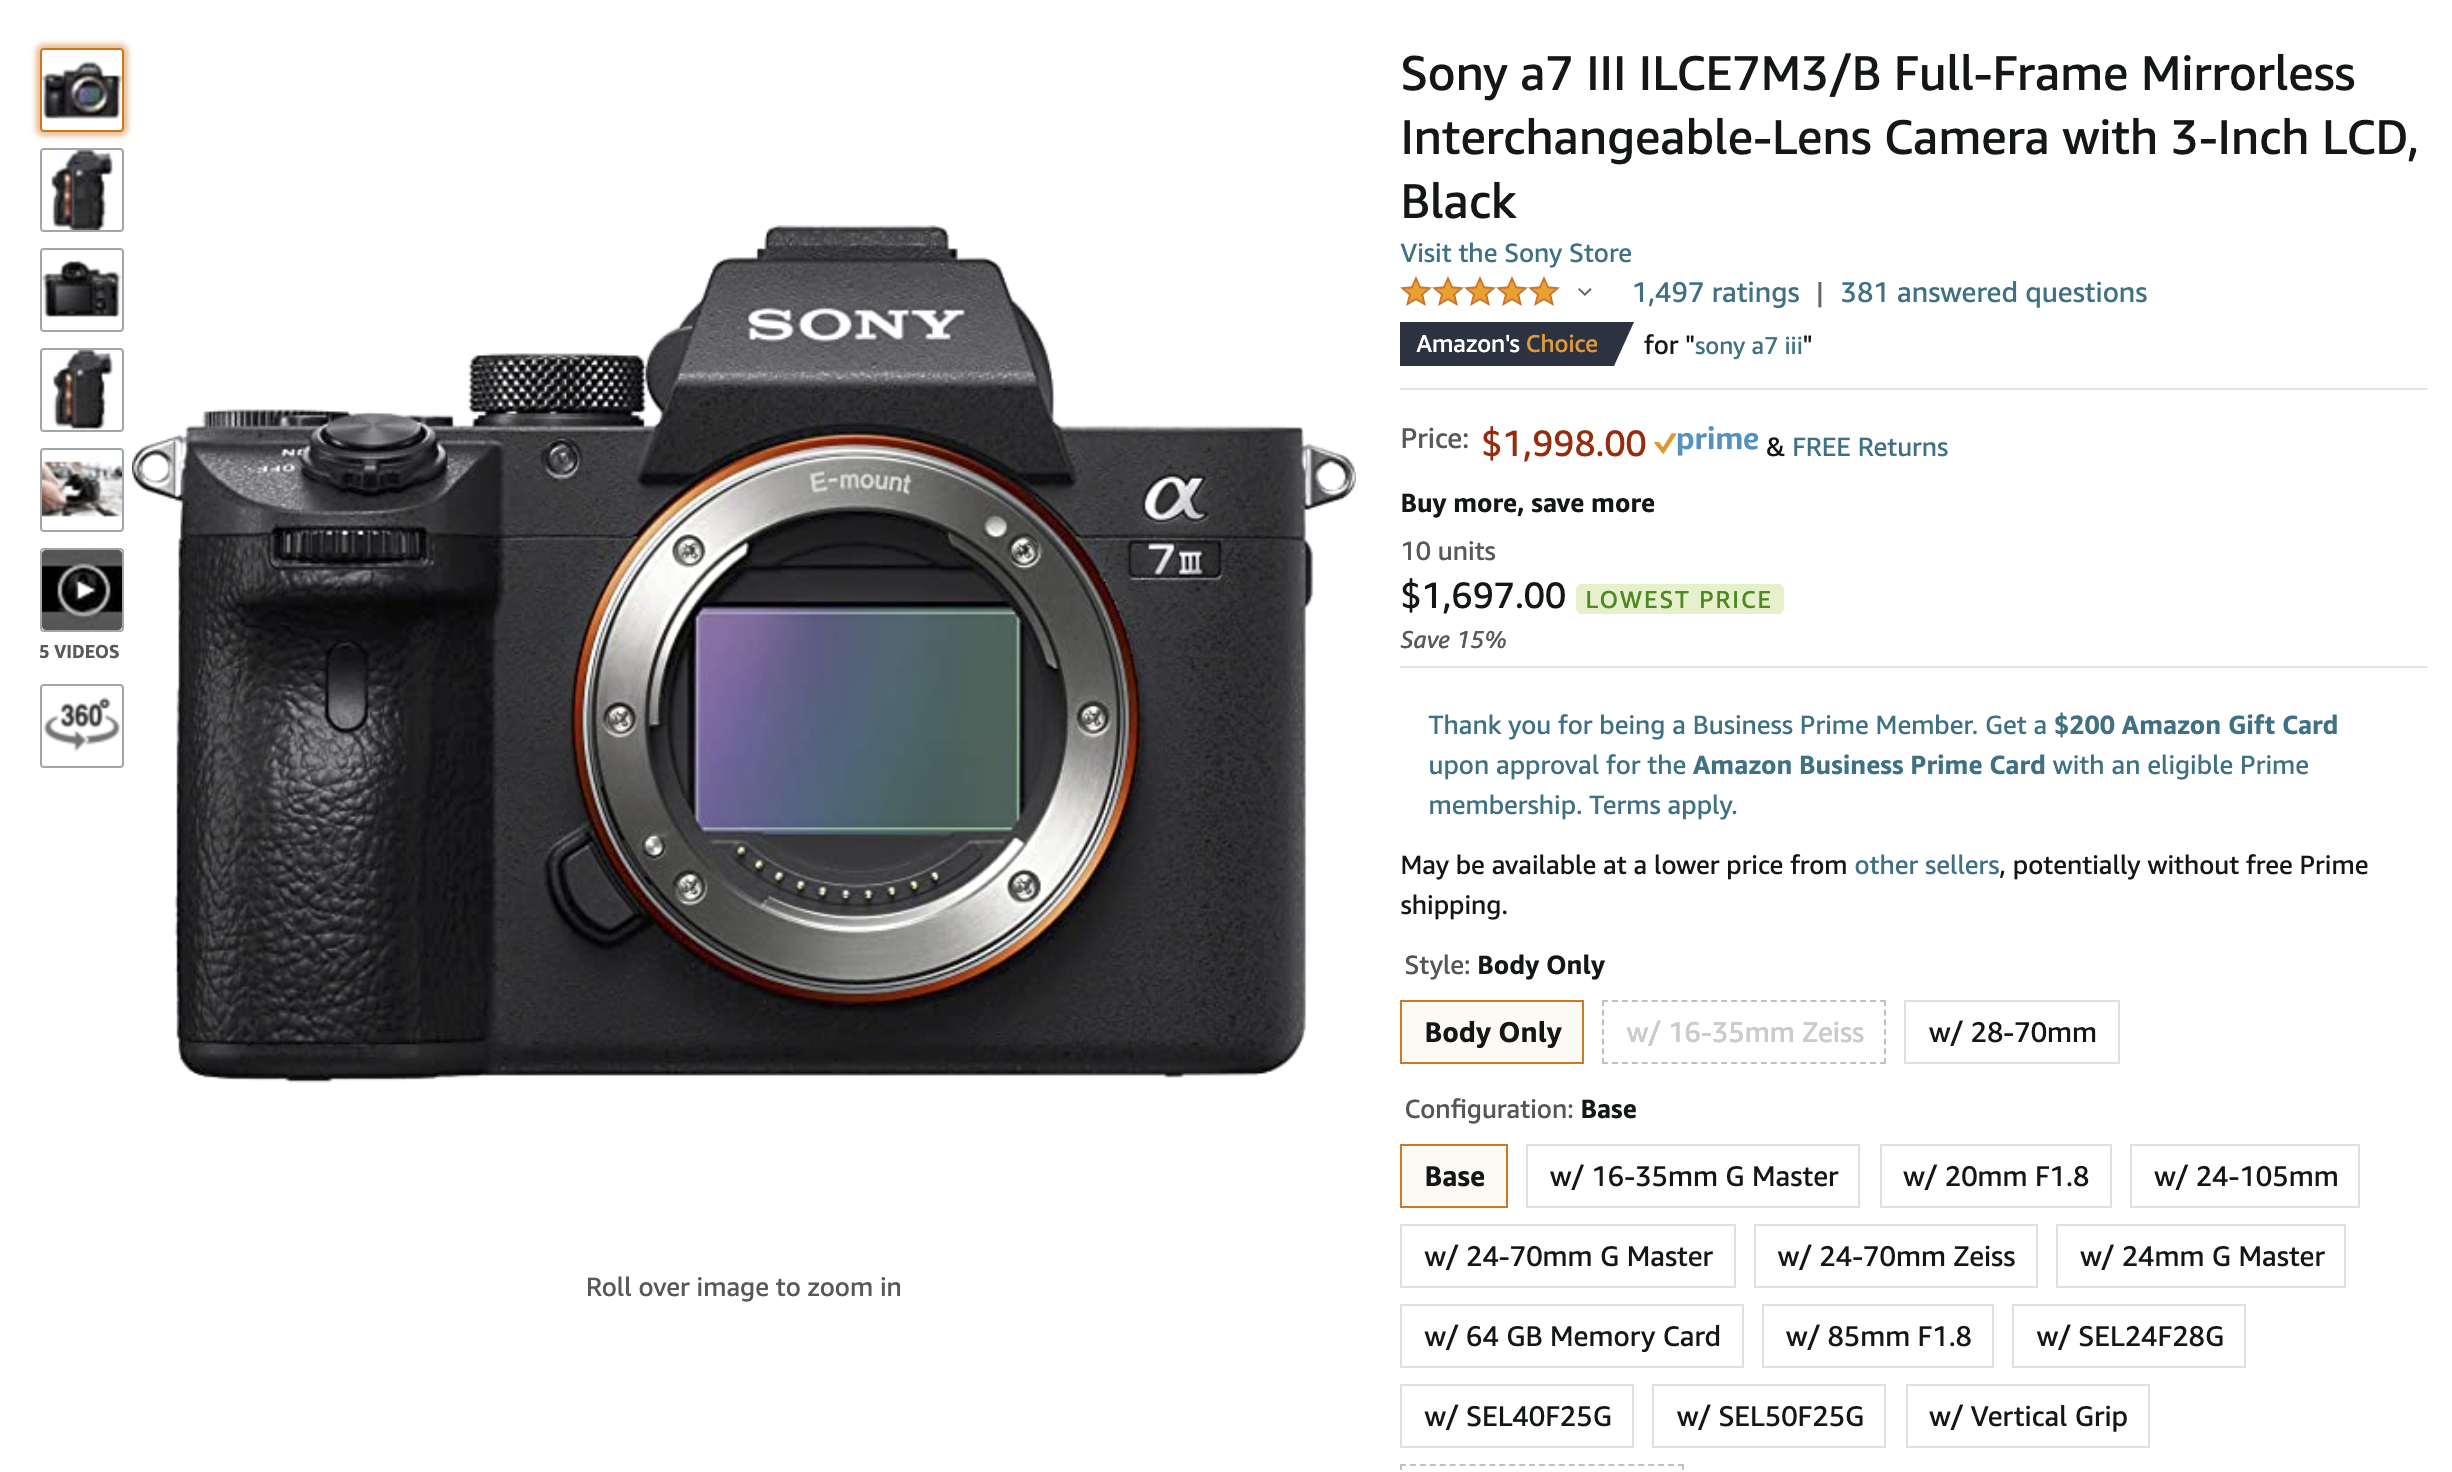 Get the Sony a7 III with One of Sony’s Best Lenses for a Deal